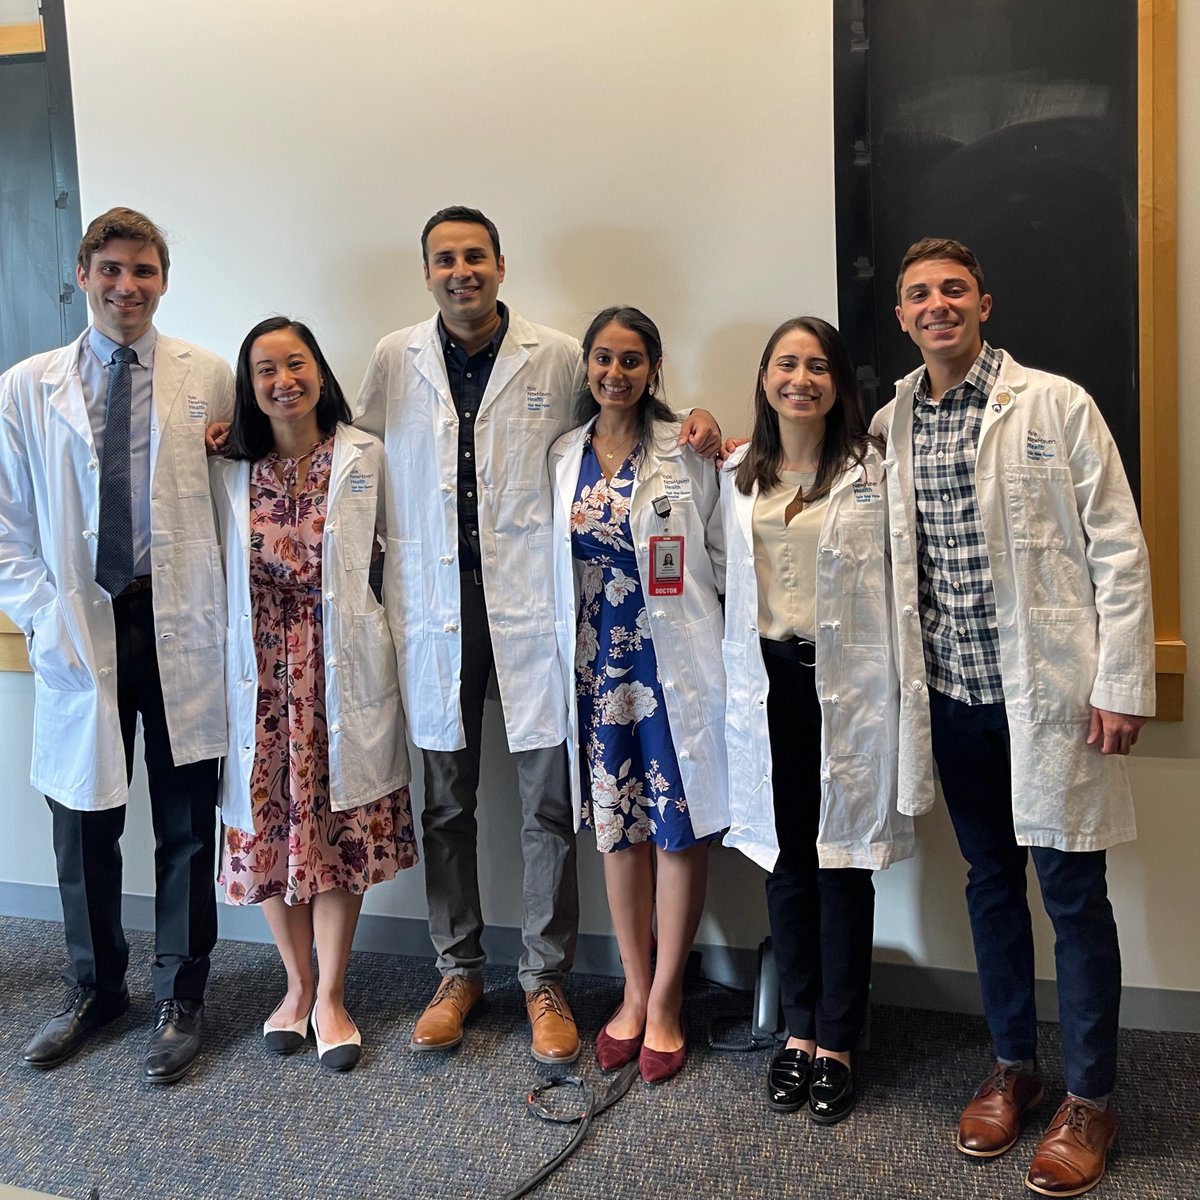 Welcome to our new fellows @loulev_md @dgoyesv @ShreyakSharma @SwathiK_MD Chris Gromisch & Ysa Ilagan-Ying! Good luck with the 1st day of fellowship! 🤞💩 #GIfellowship